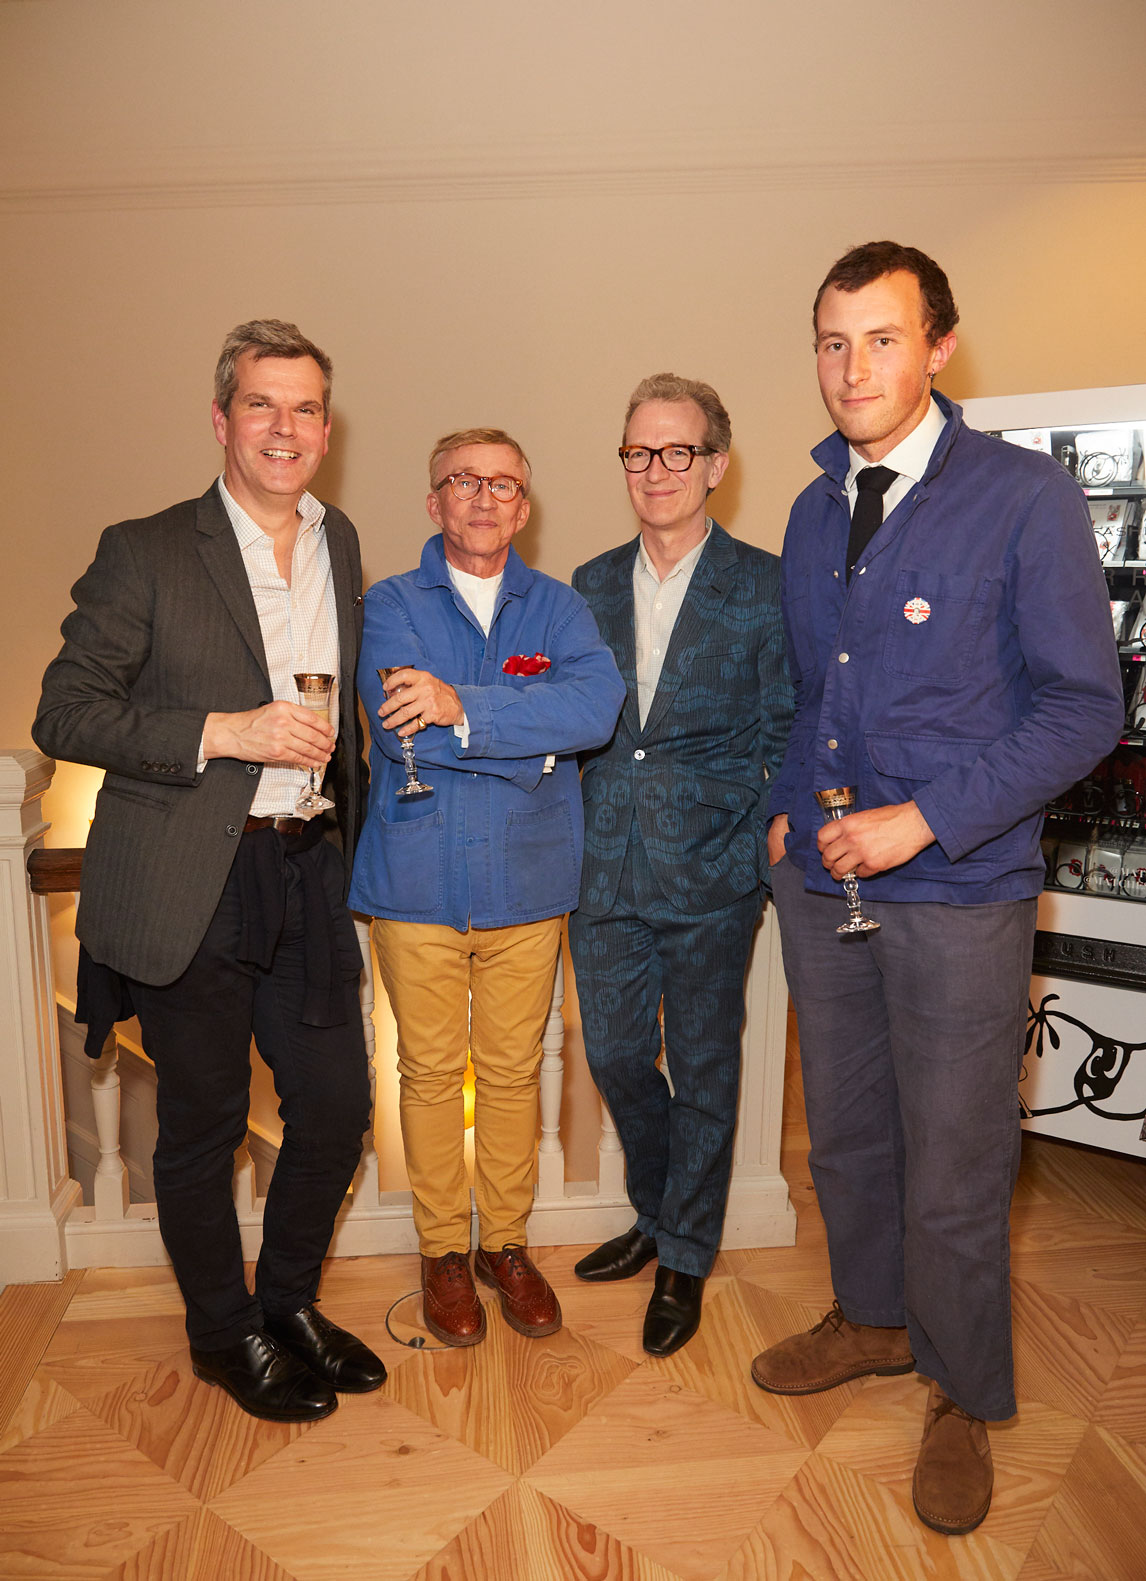 Ben Pentreath and Jasper Conran at the Interiors launch at MATCHESFASHION.COM in London